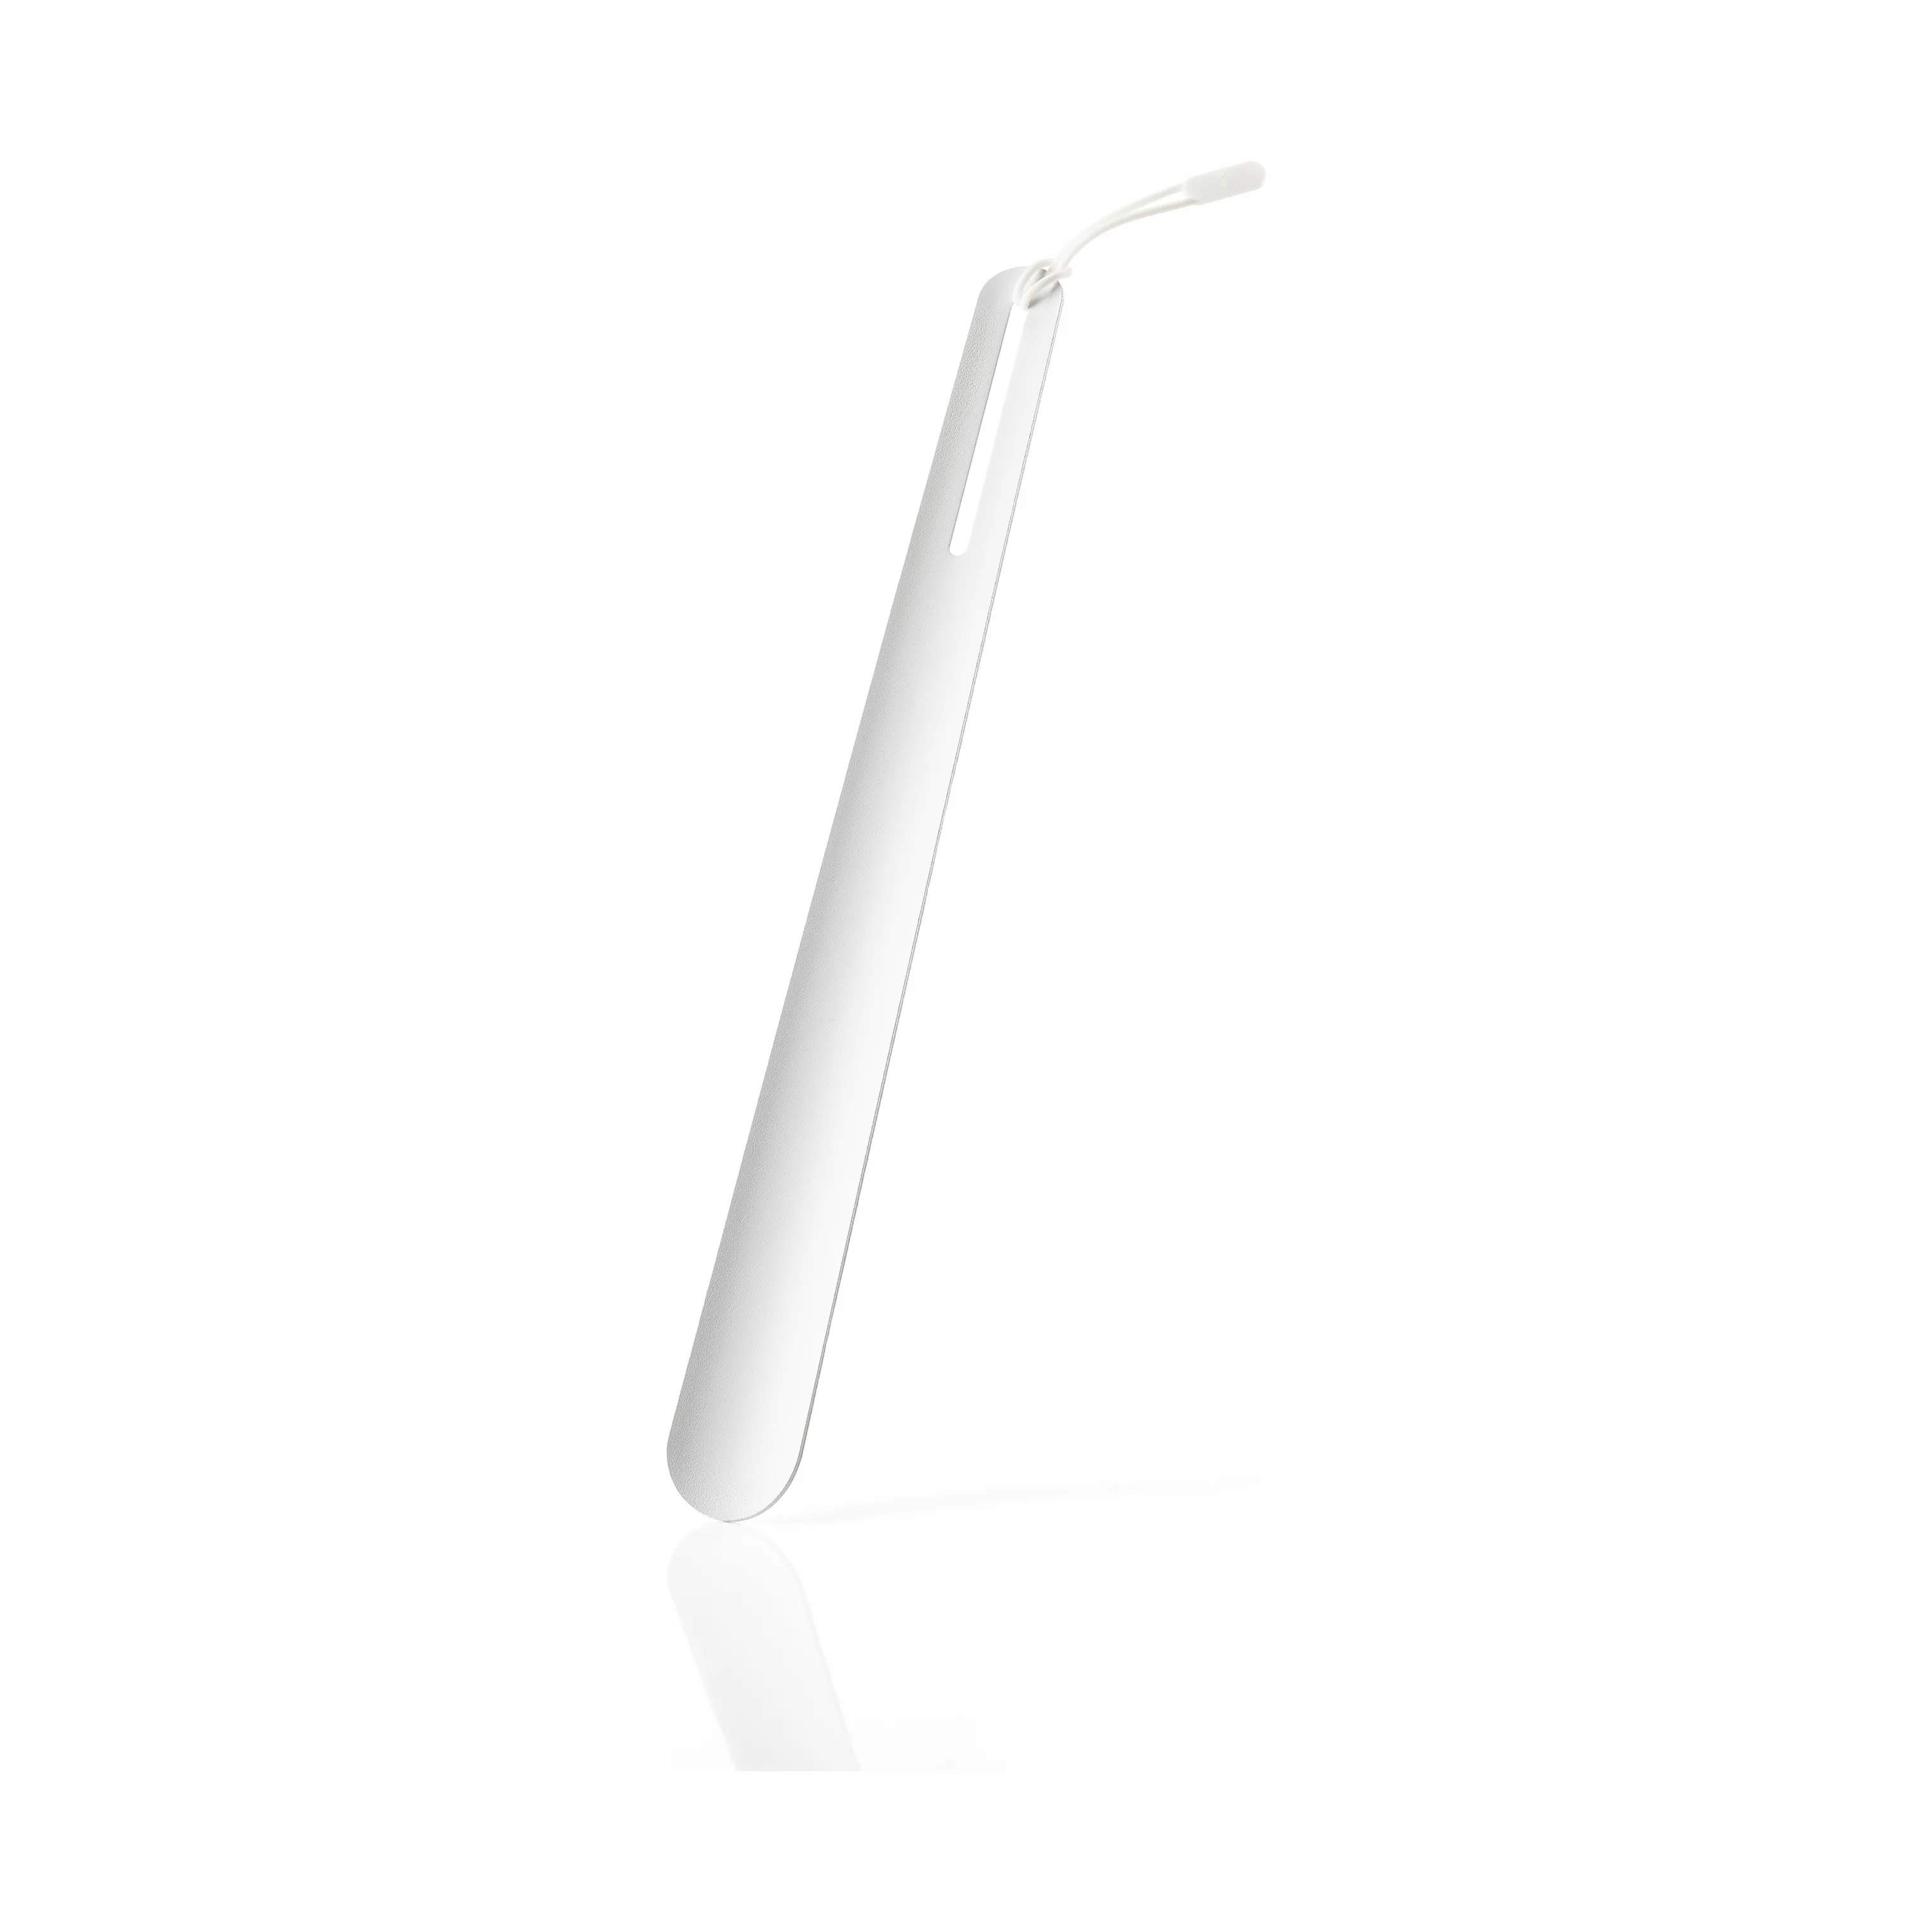 A-Shoehorn Skohorn, white, large